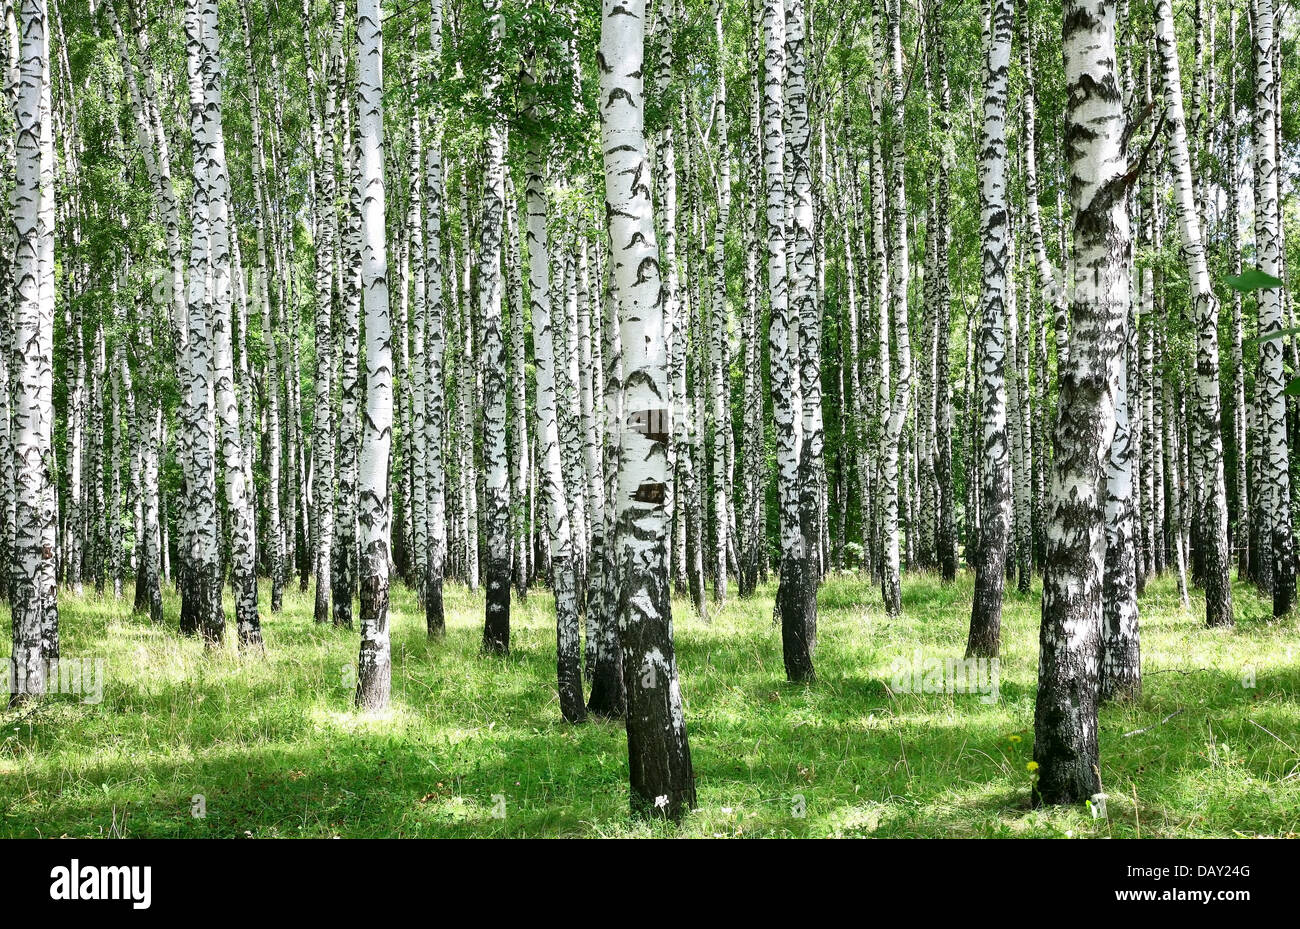 Summer july view of birch grove in sunlight Stock Photo